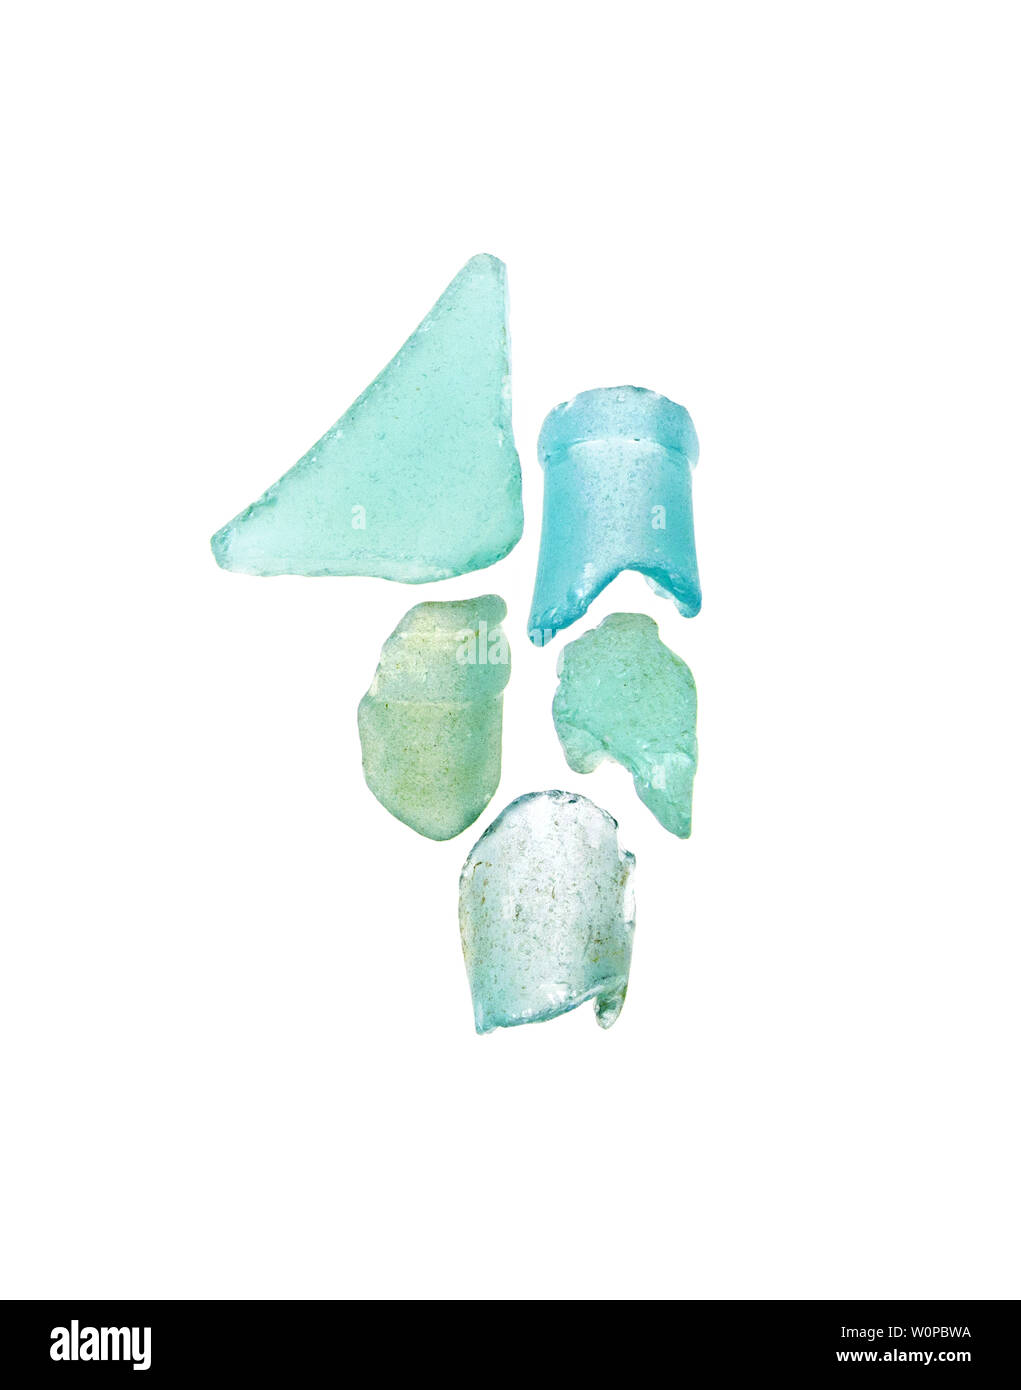 Sea glass in shades of blue and aqua photographed on a white background. Stock Photo